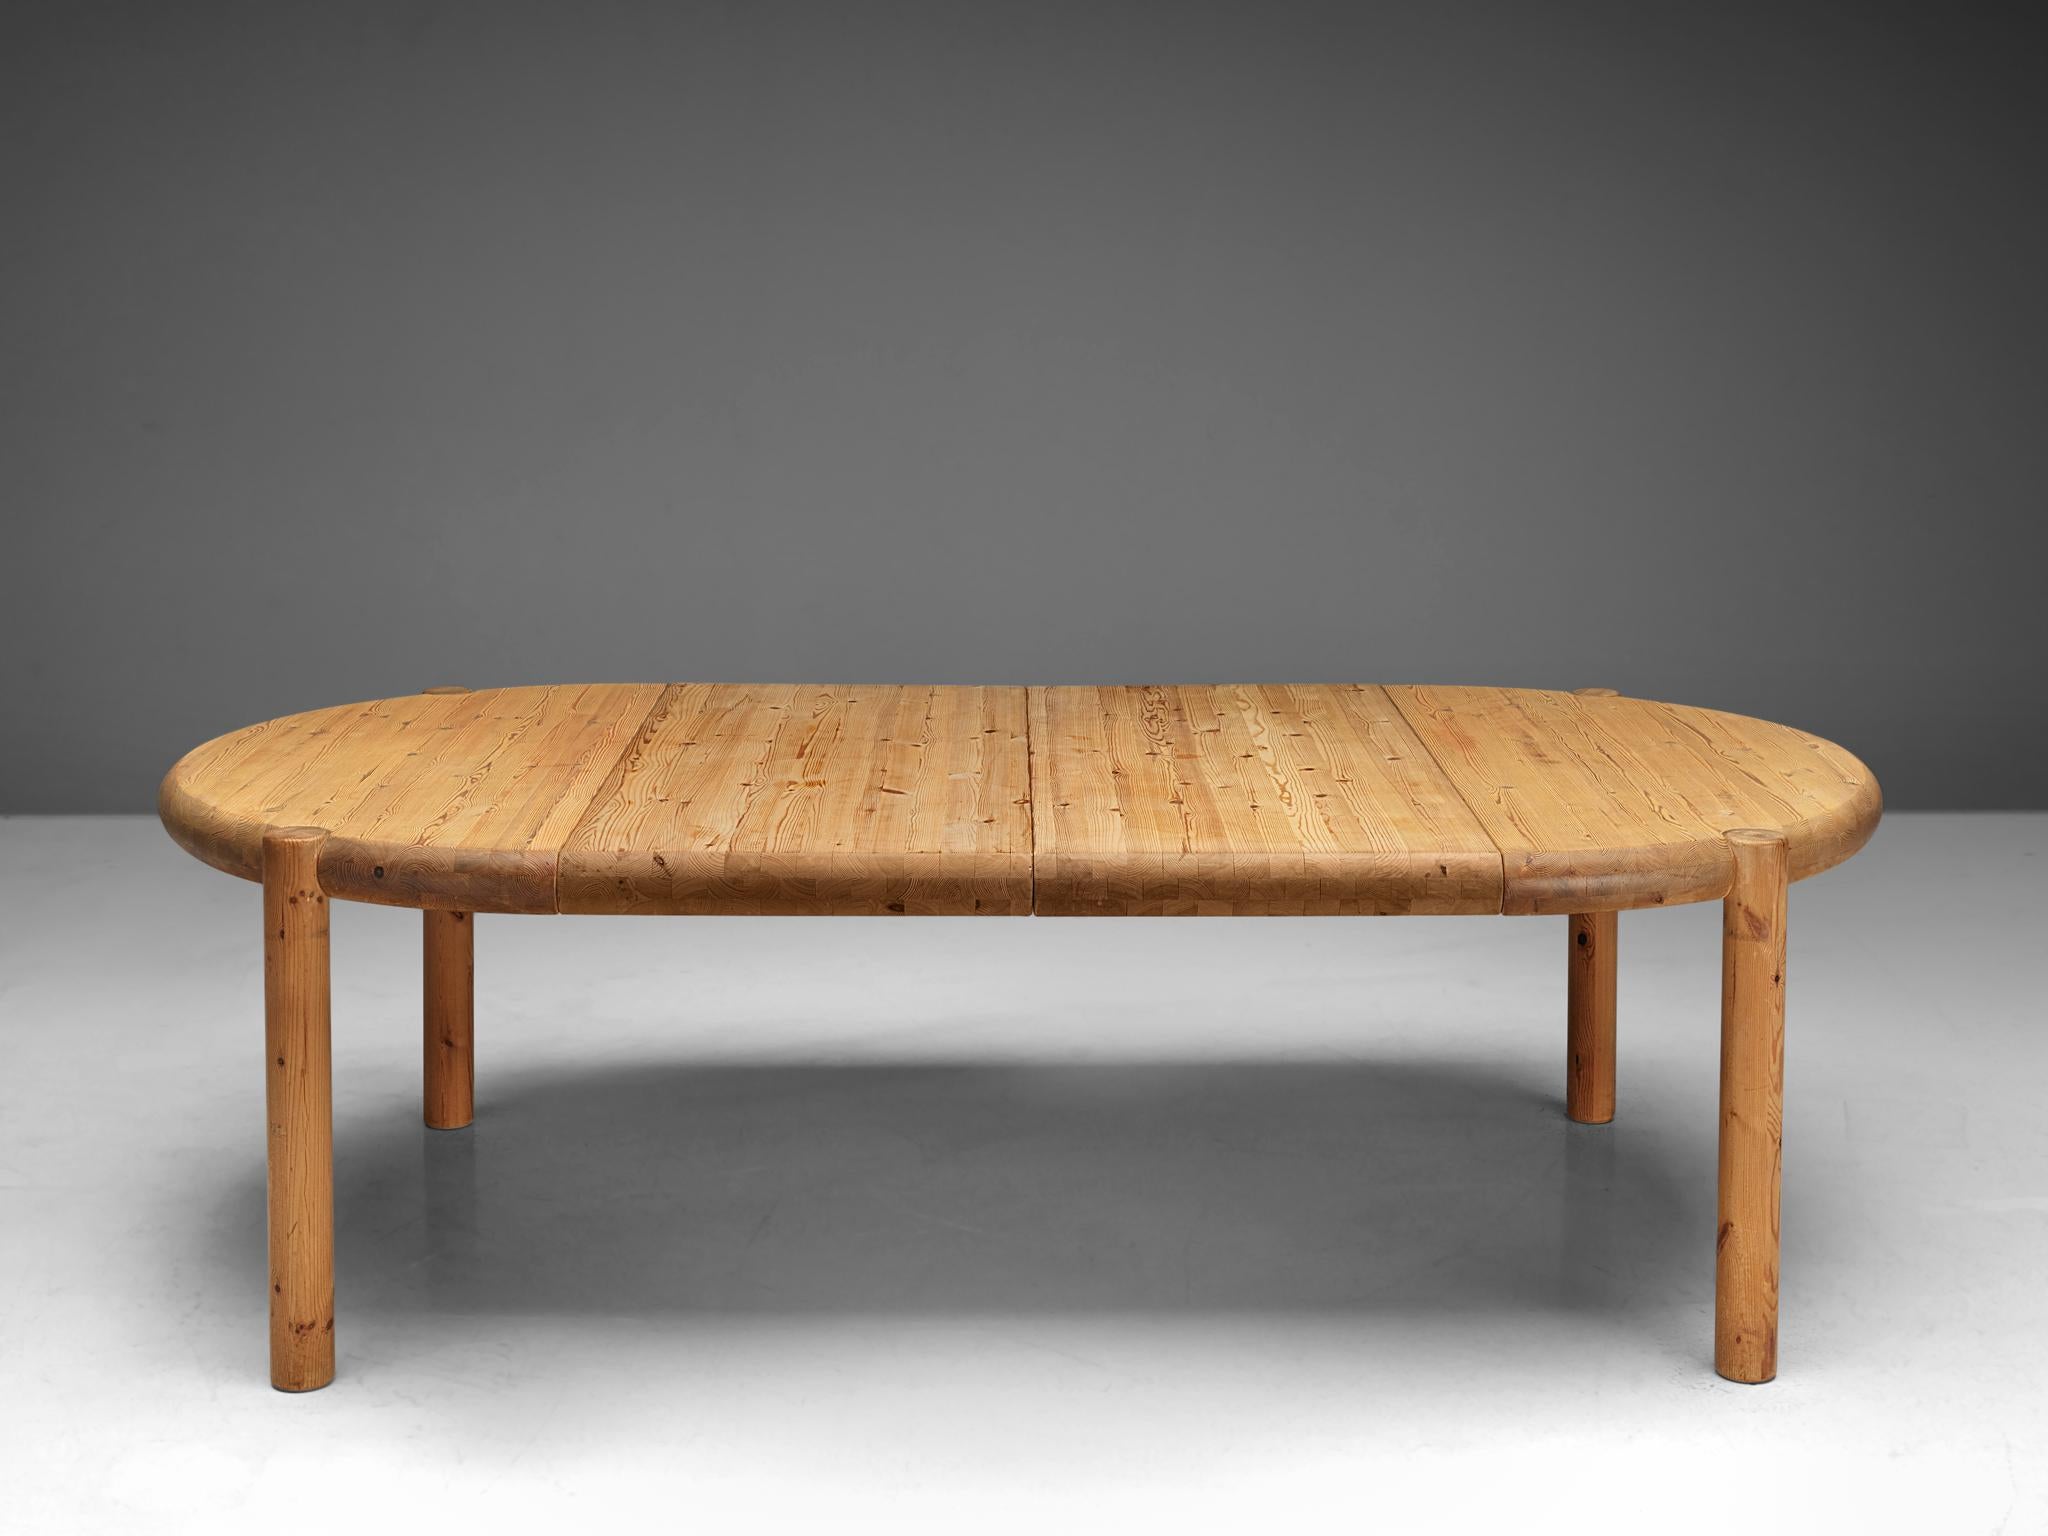 Rainer Daumiller, extendable dining table, pine, Denmark, 1970s

Robust dining table in solid pine, designed by Rainer Daumiller. A functional design that features a rounded tabletop when not extended and an oval top when the two leaves are added to